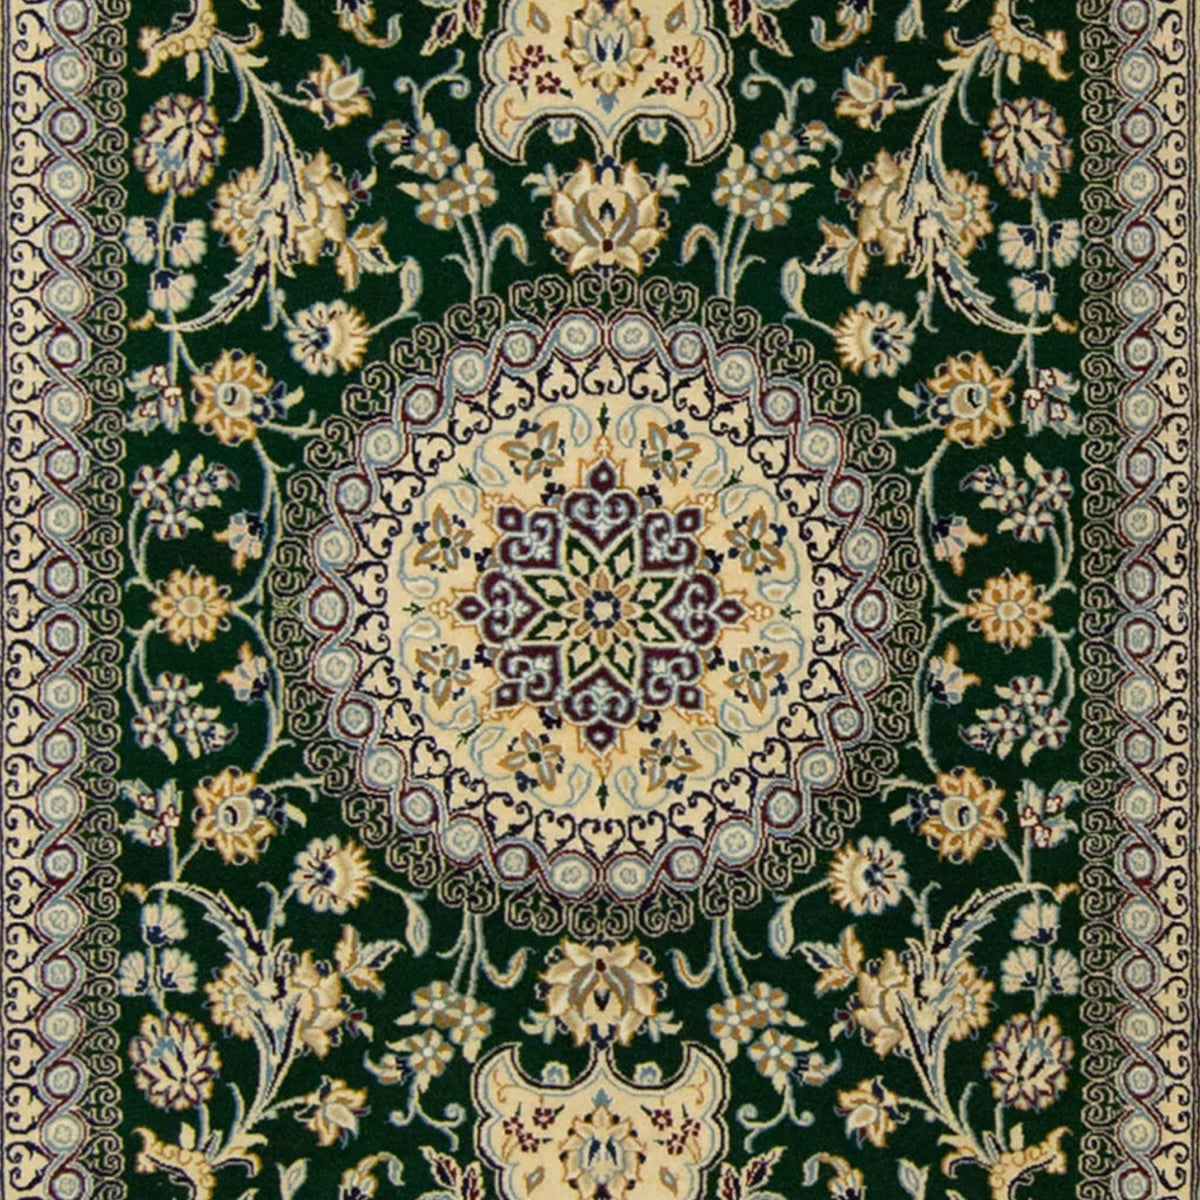 Authentic Fine Persian Hand-knotted Habibian 3LAA Nain Wool &amp; Silk Rug ( SIGNED HABIBIAN ) 125cm x 190cm